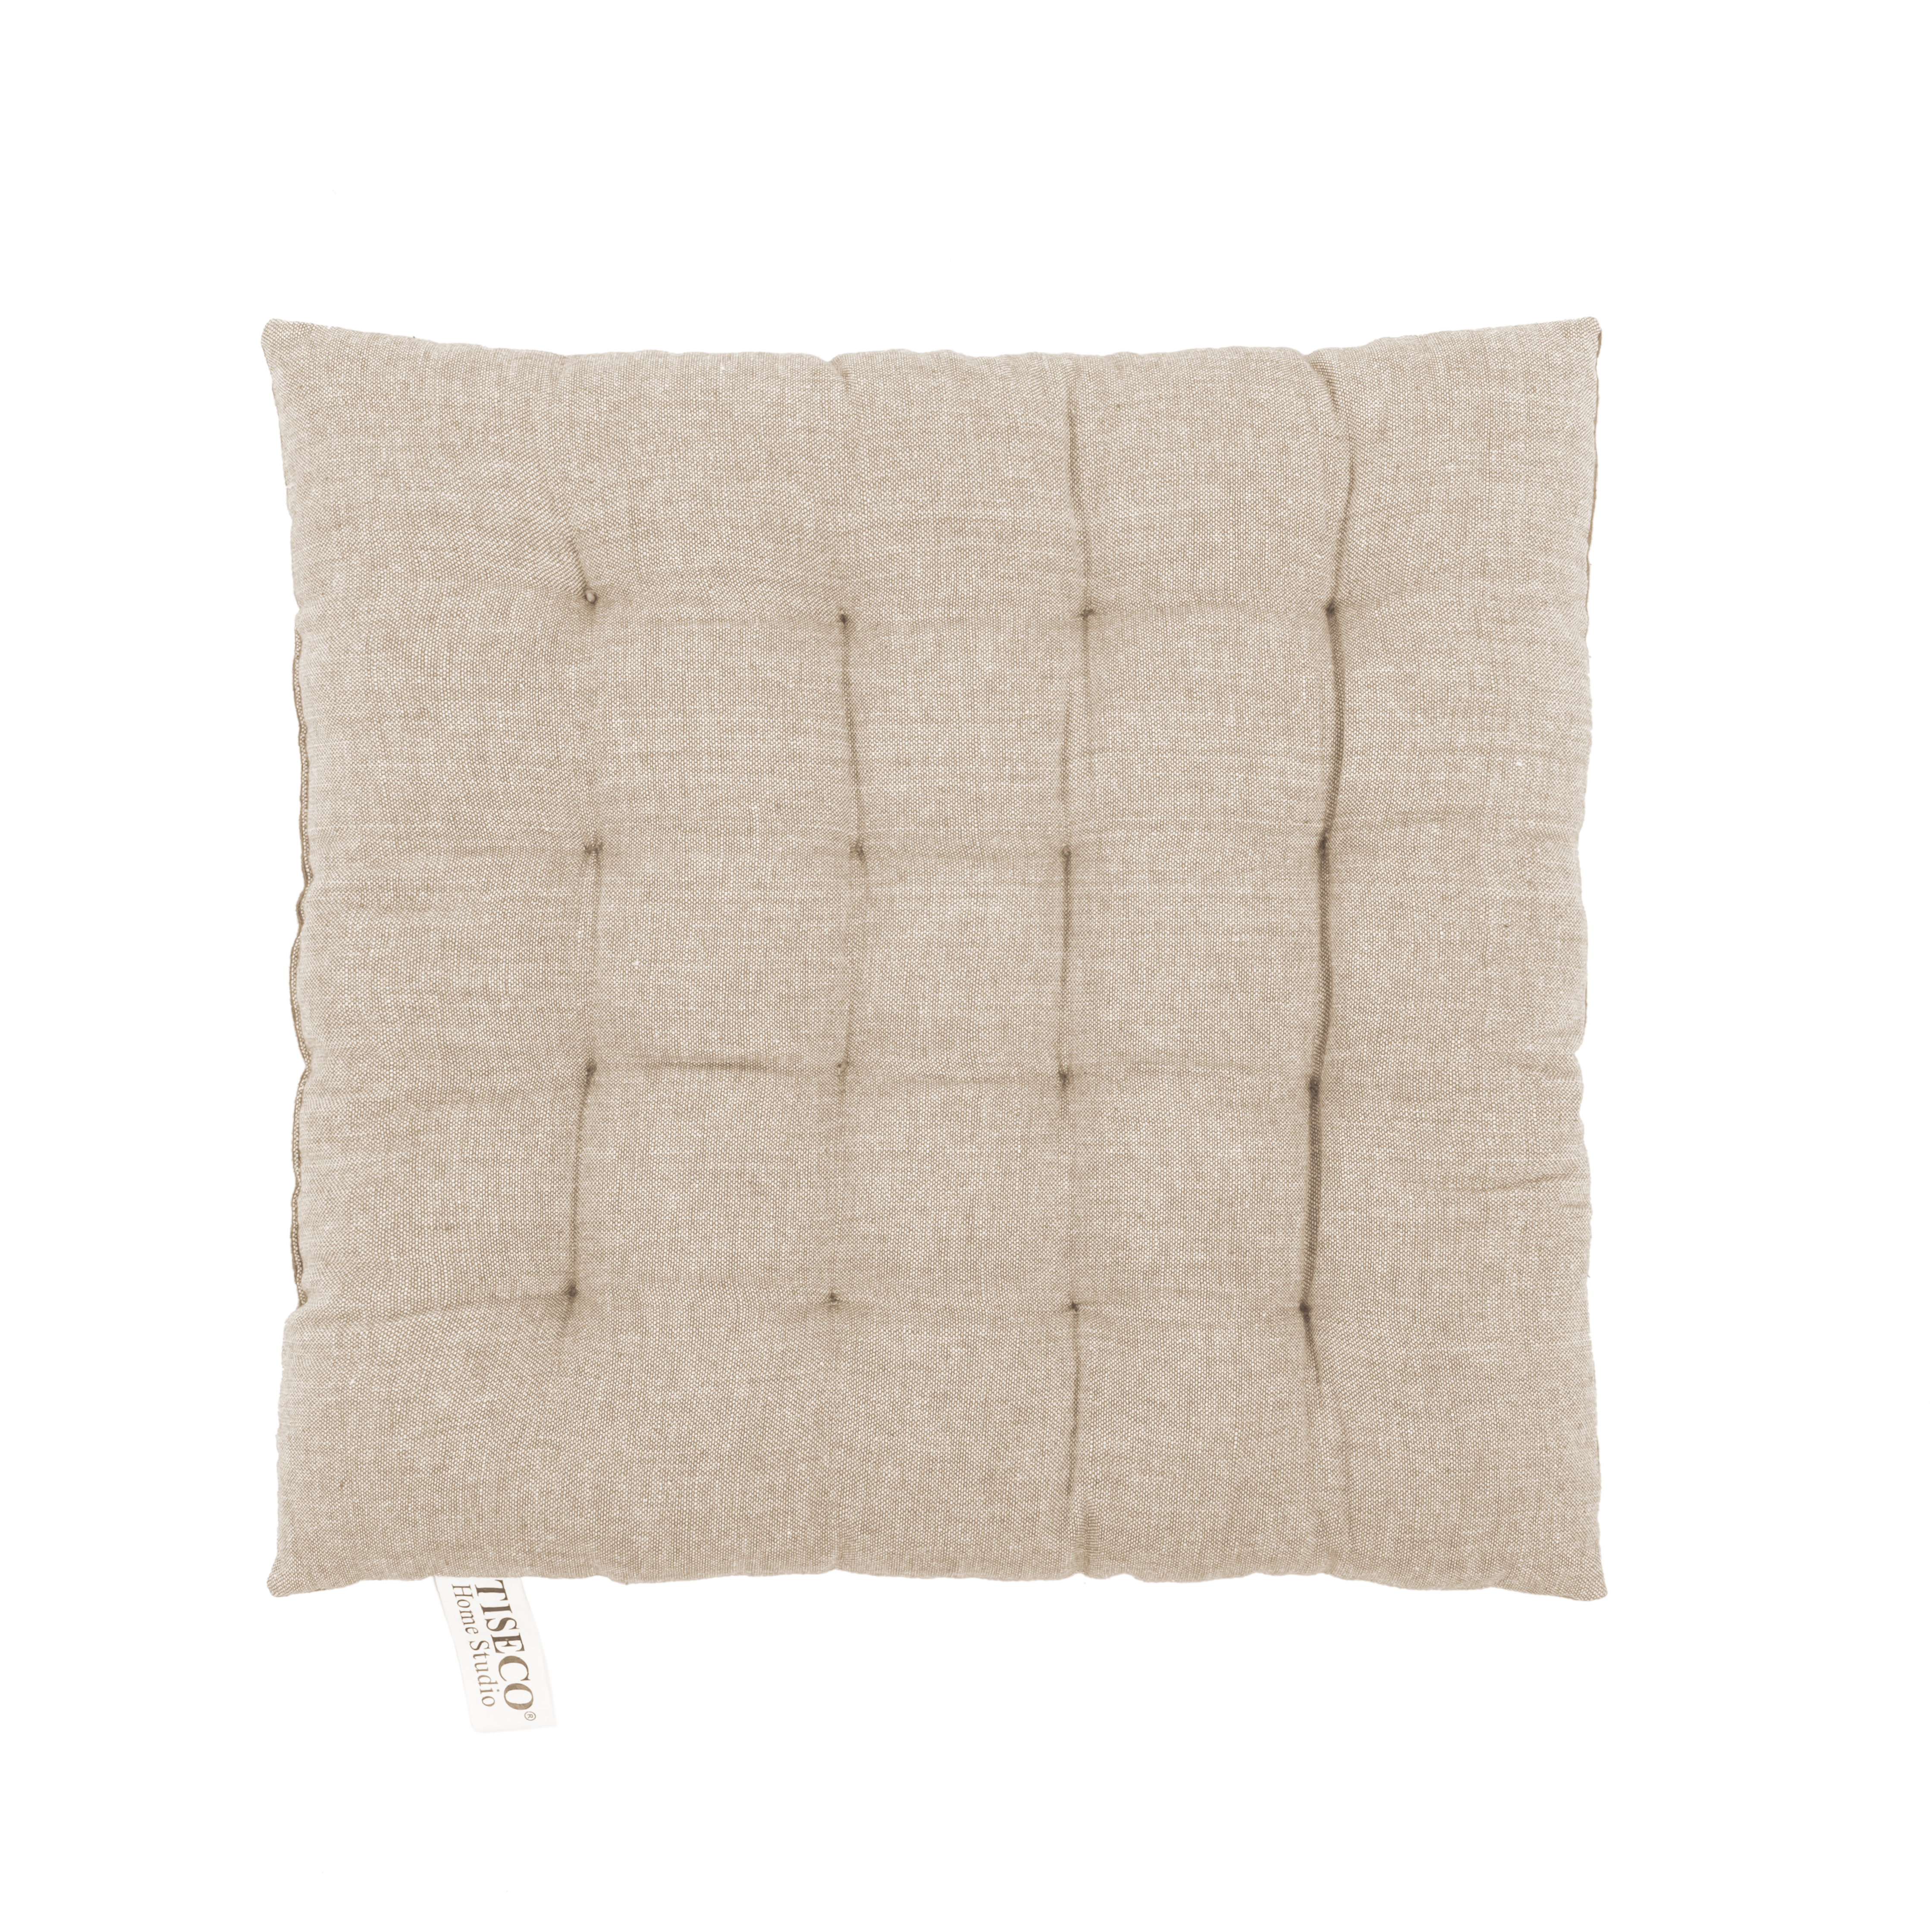 Galette de chaise CHAMBRAY 40x40cm -16 thuck, taupe